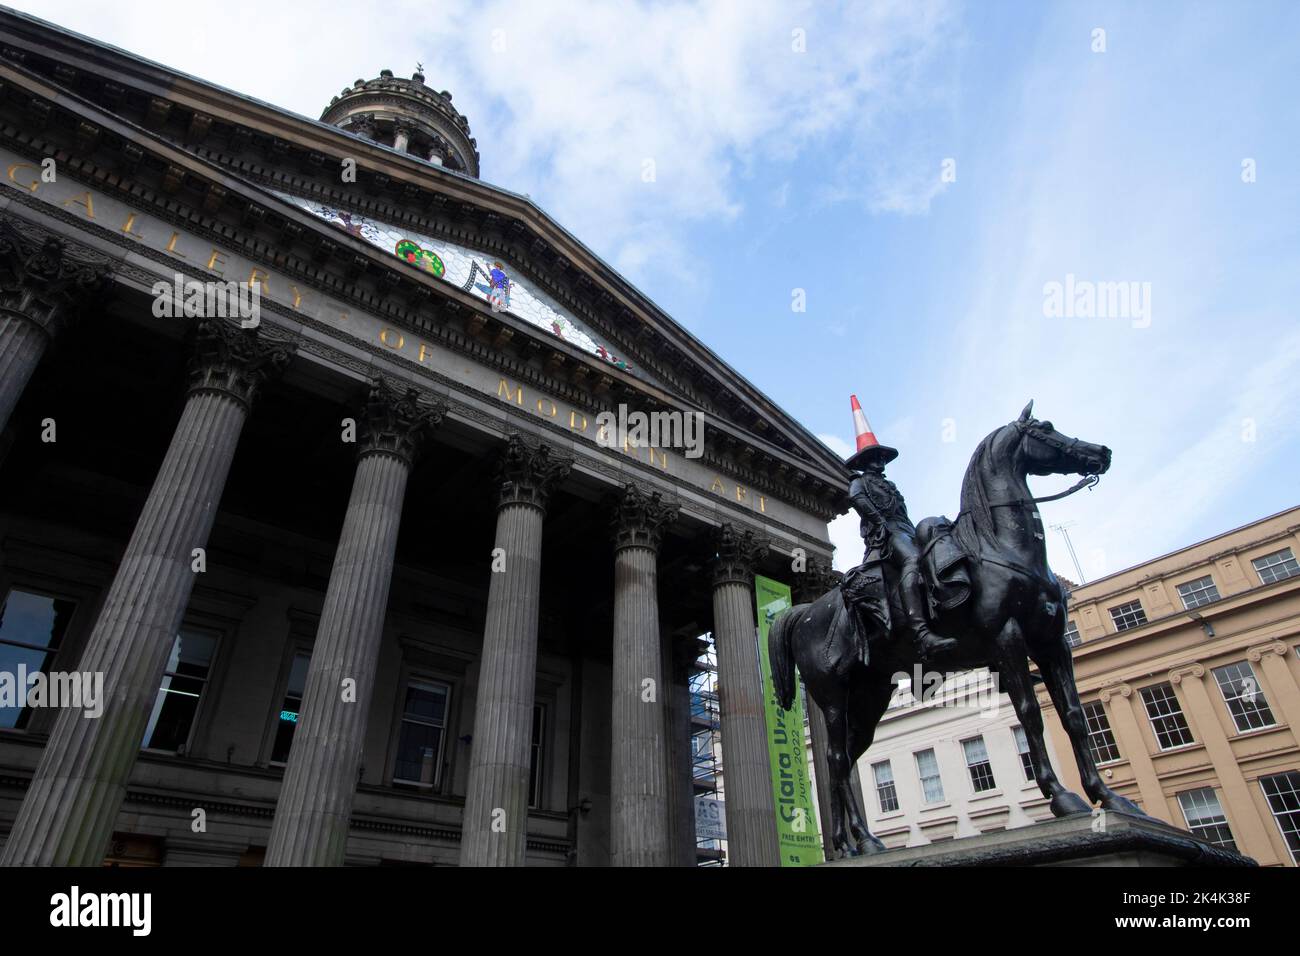 The Gallery of Modern Art (GOMA), with the equestrian statue of the Duke of Wellington complete with a traffic cone on his head, Glasgow, Scotland UK Stock Photo